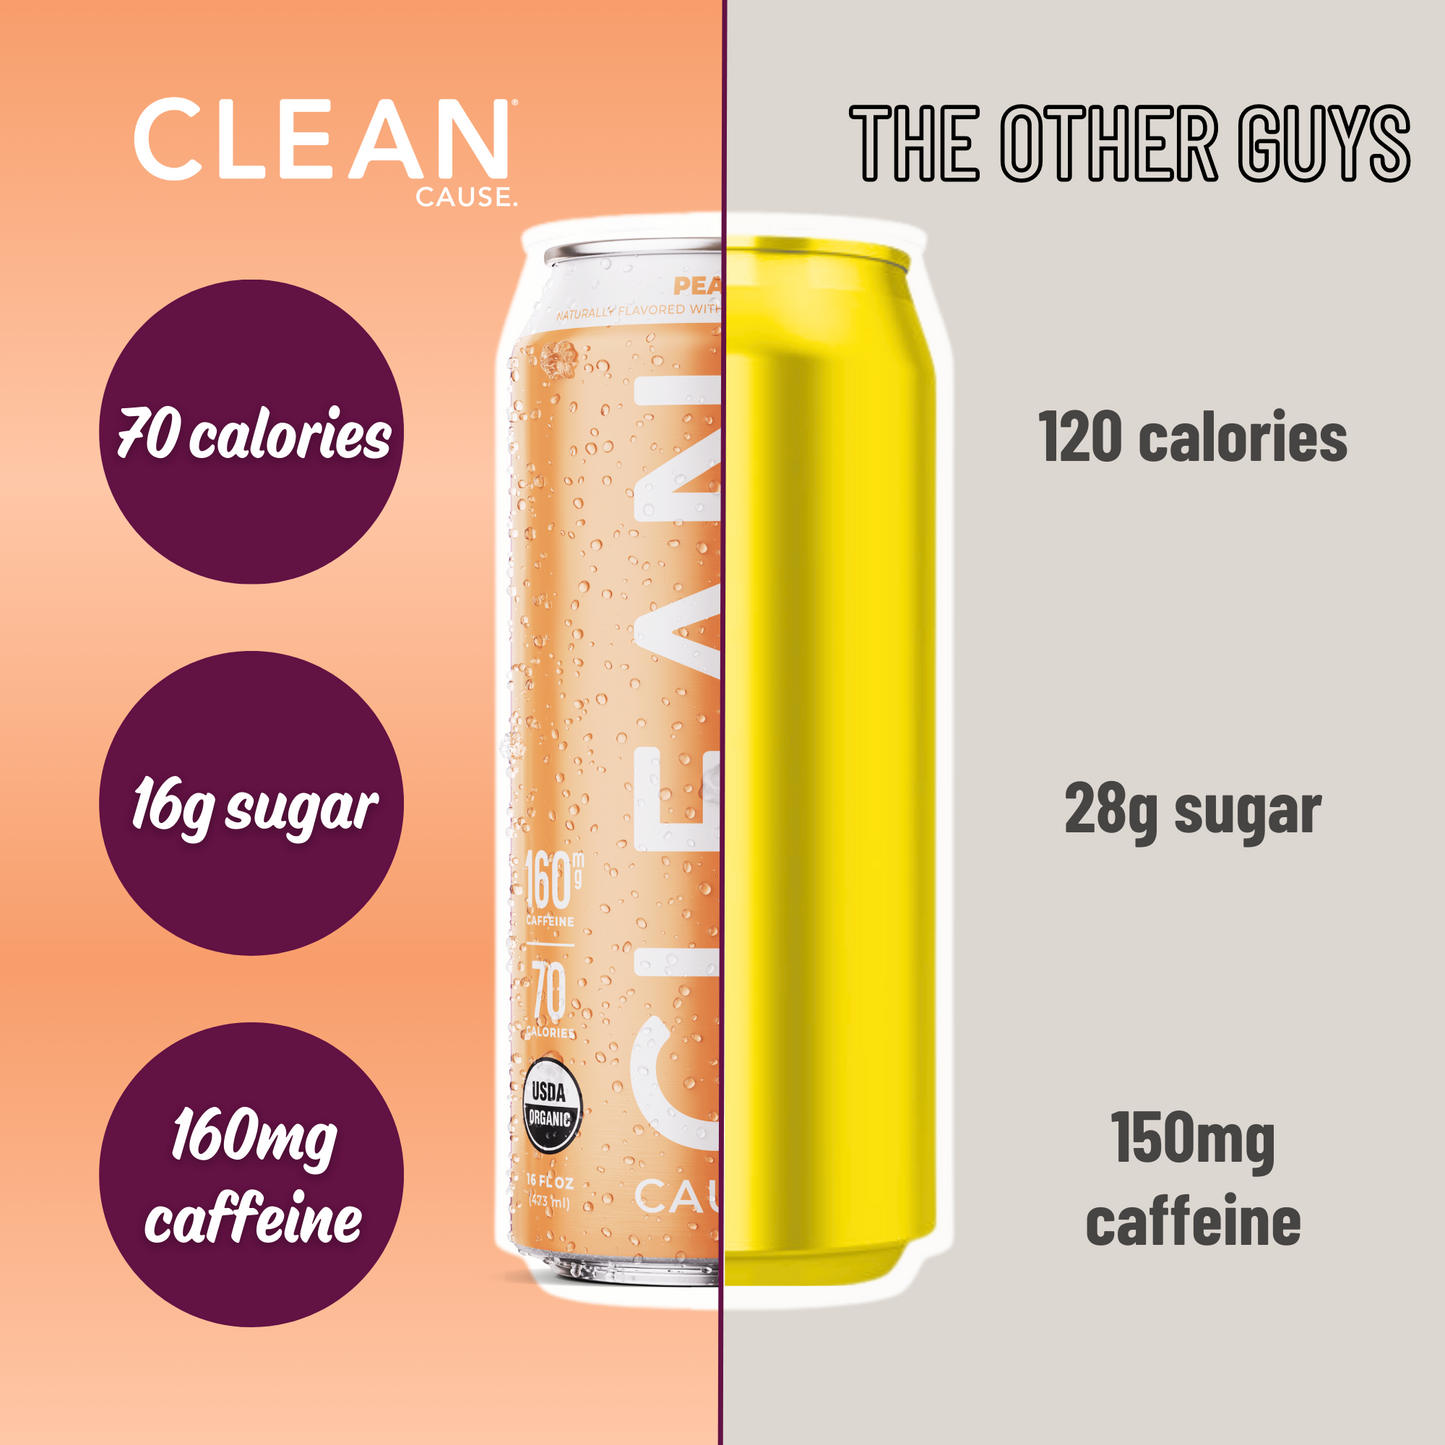 A can split between CLEAN Peach Yerba Mate and "The Other Guys" showing CLEAN with 70 calories, 16g sugar, and 160mg caffeine and the other guys with 120 calories, 28g sugar, and 150mg caffeine